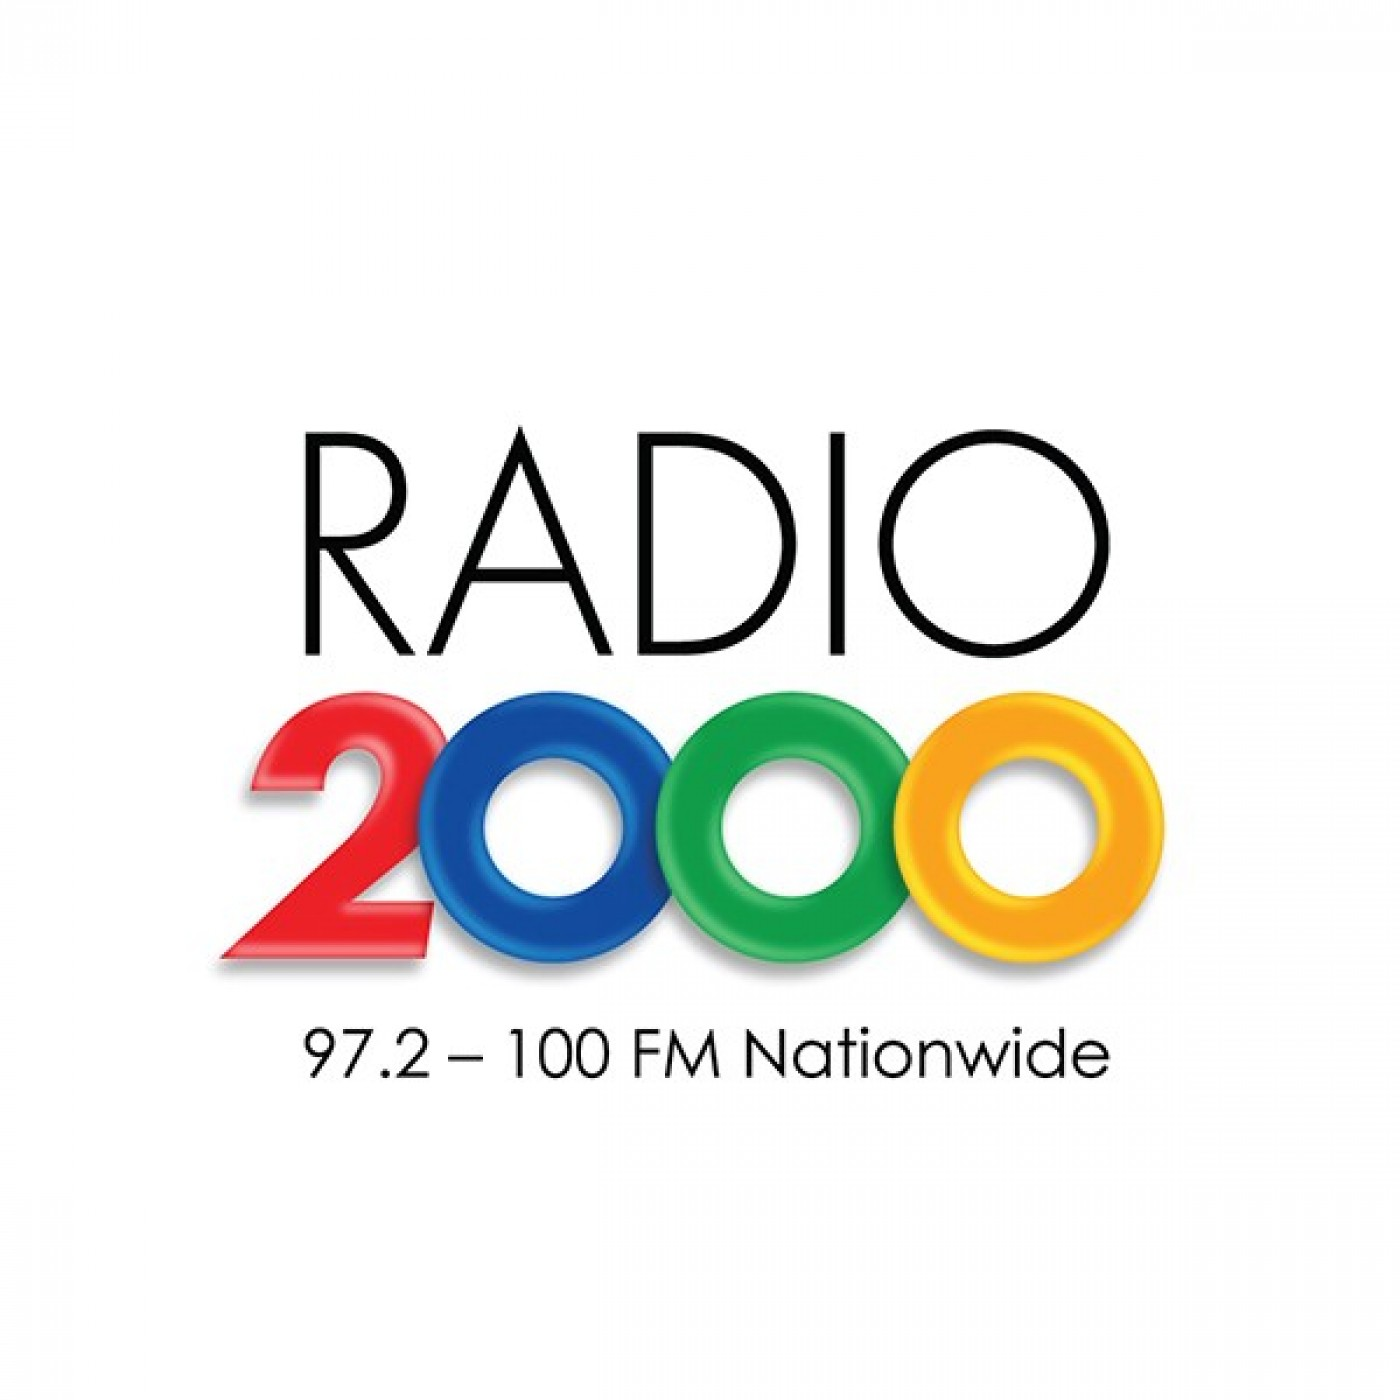 RADIO 2000 IN THE MIX #AIMNOT2SWEAT MIXED BY DJ MILES 24-04-2020 22H00-22H20